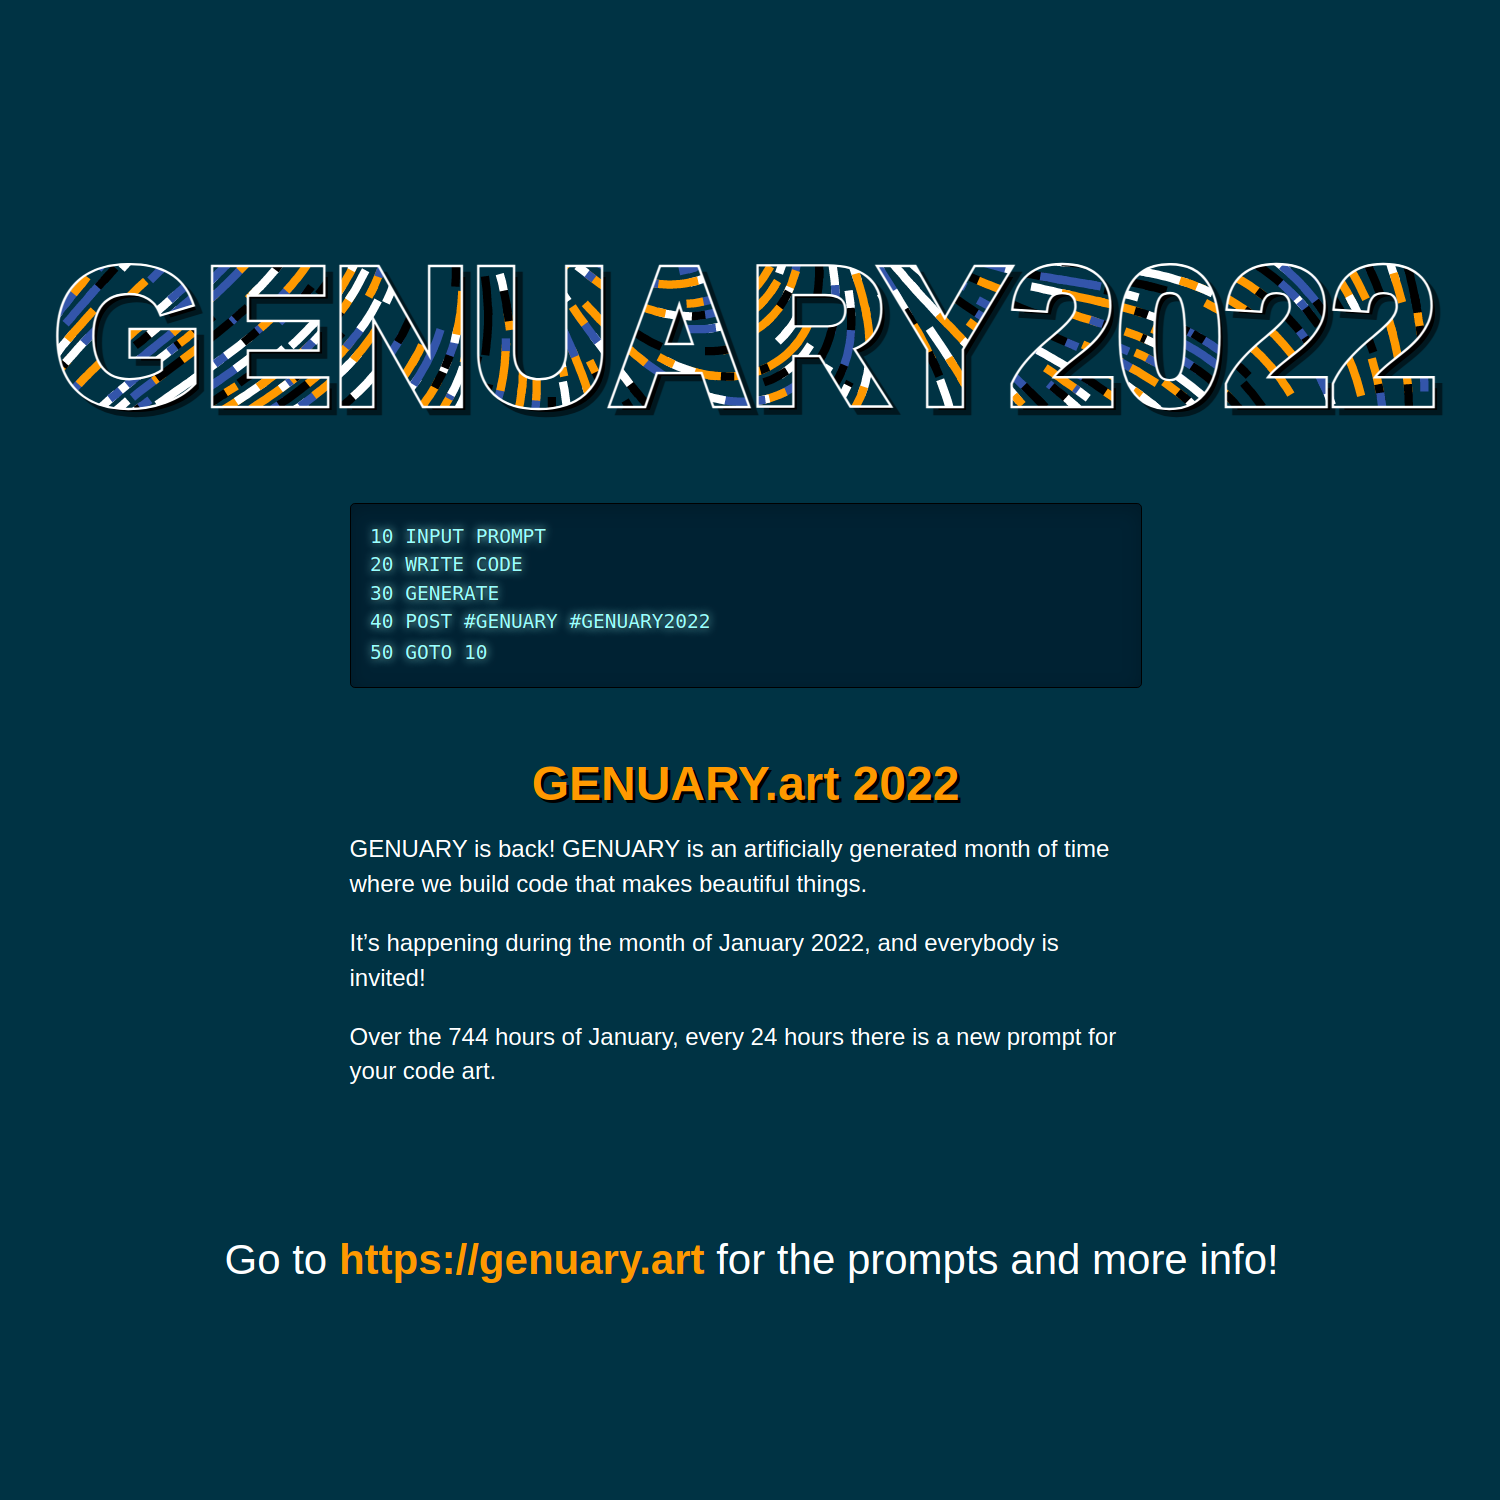 genuary-promo1.png